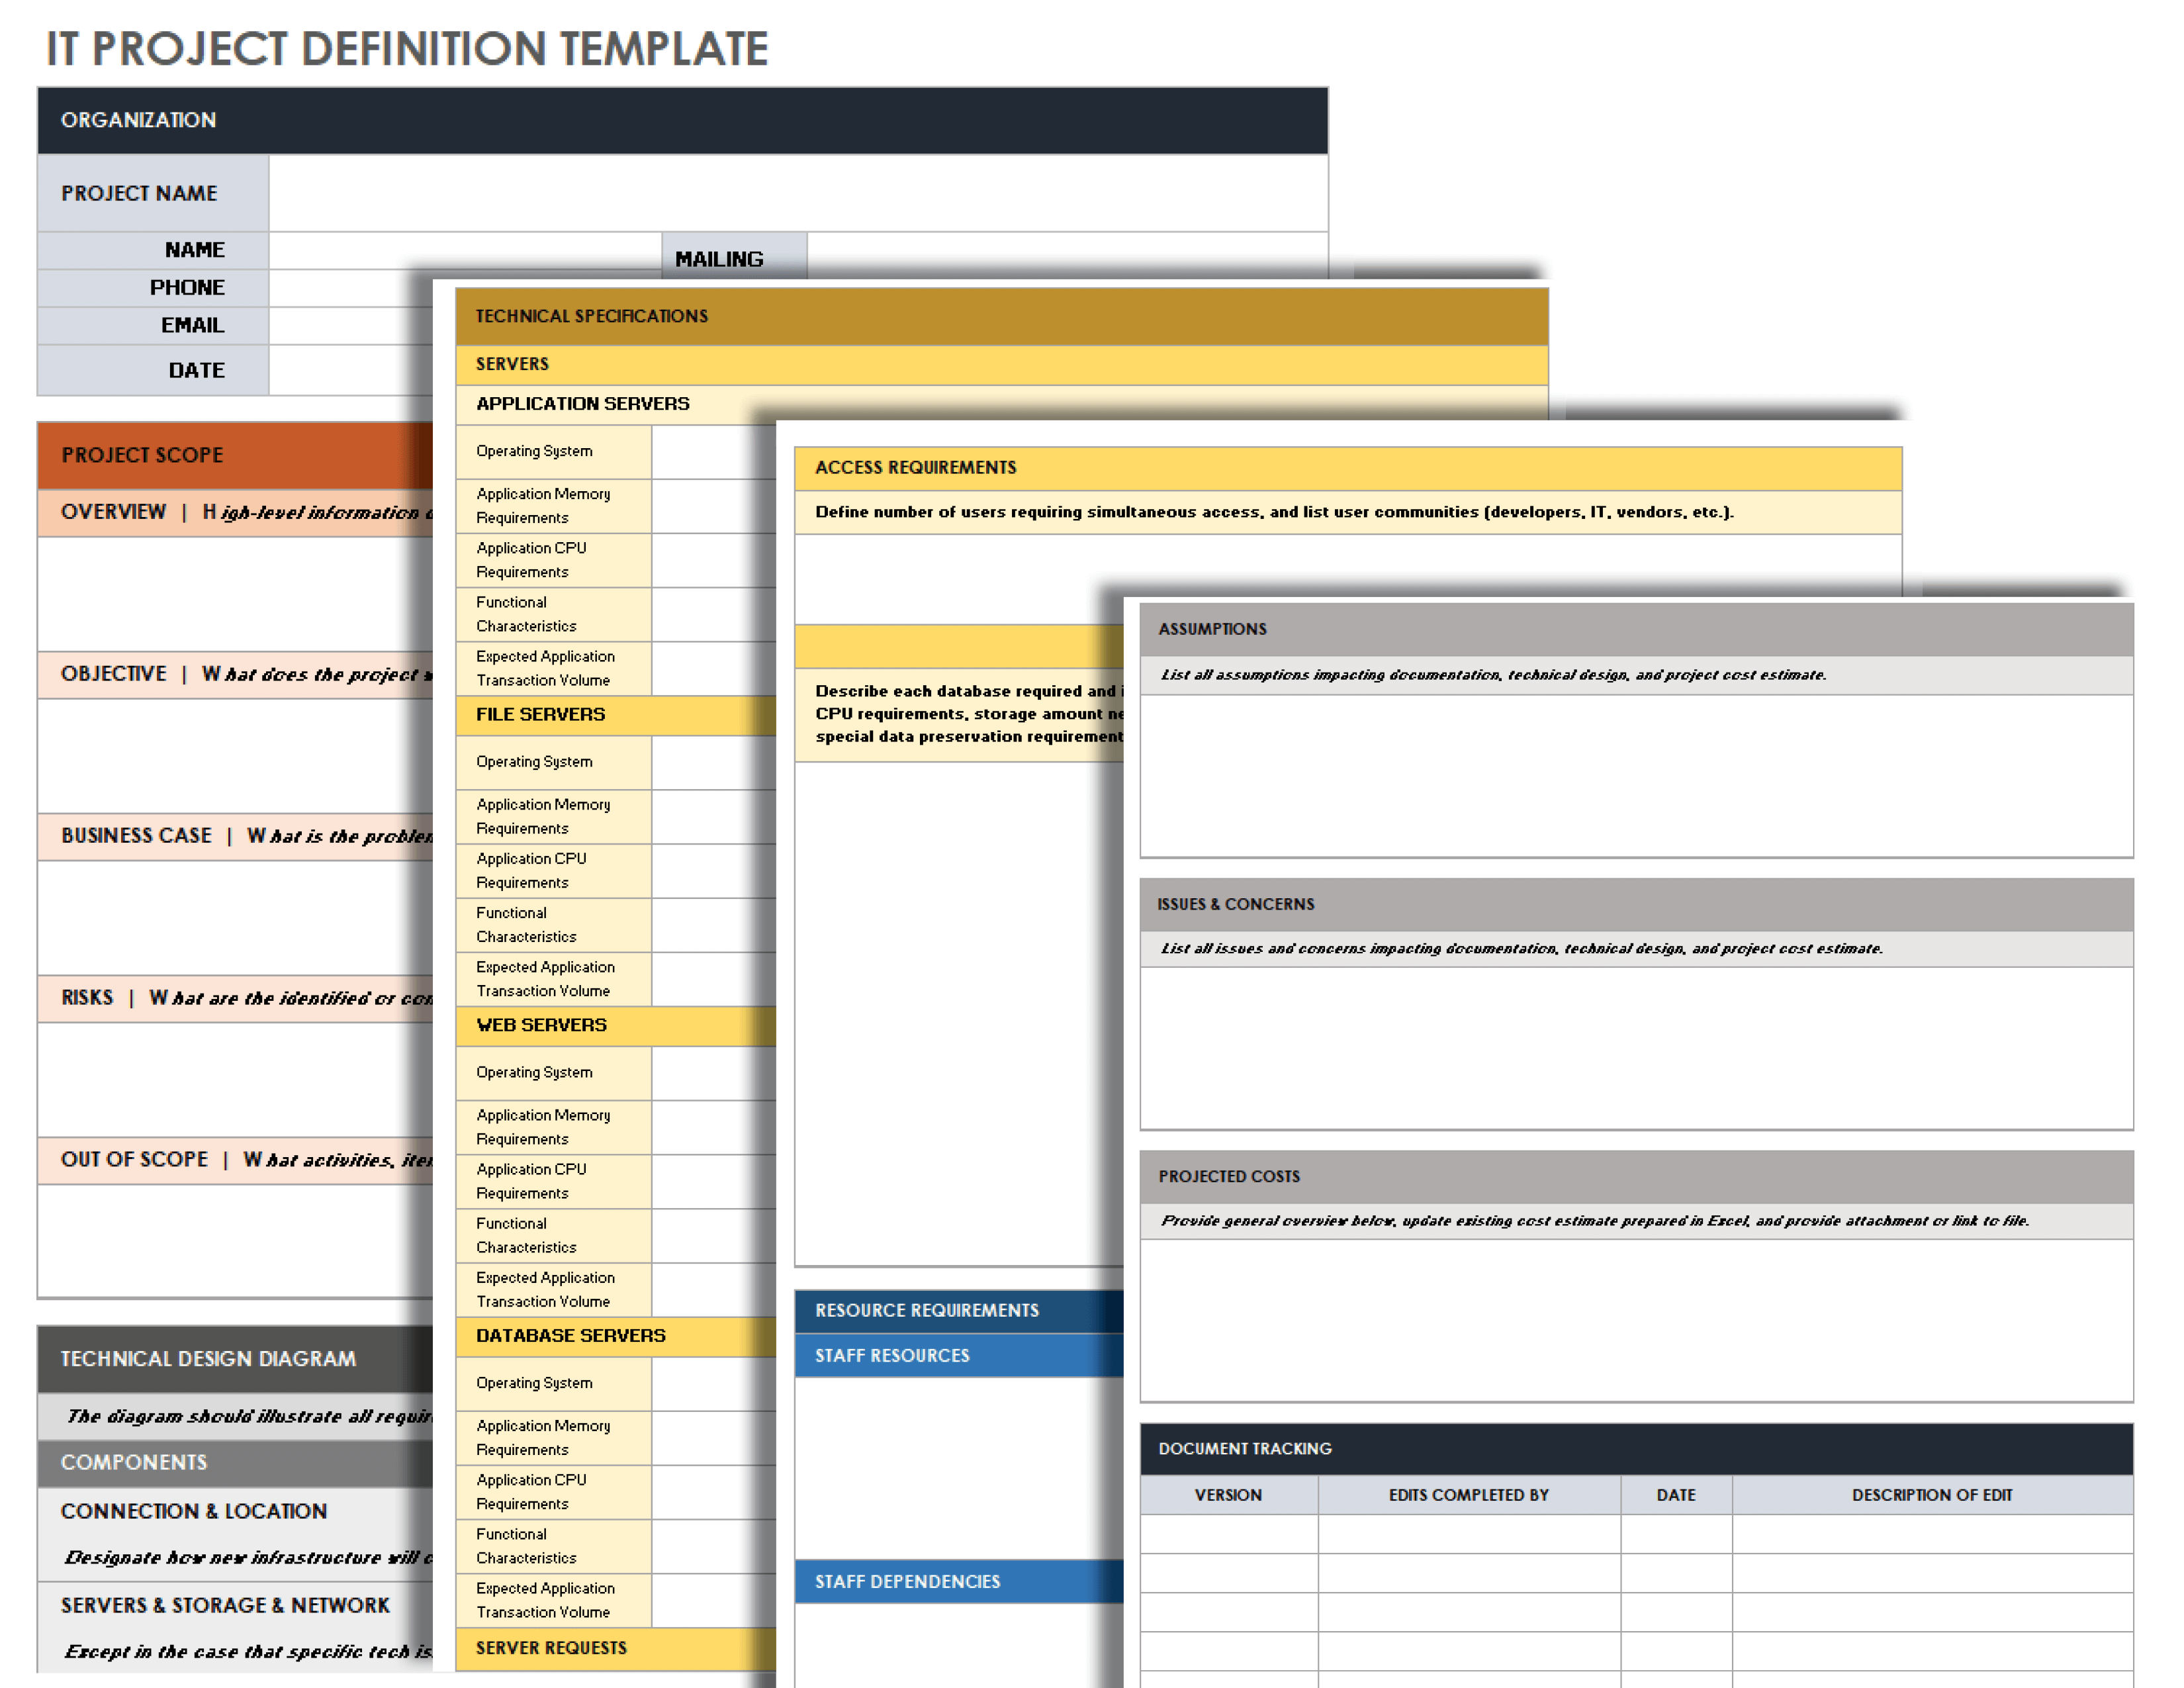 IT Project Definition Template